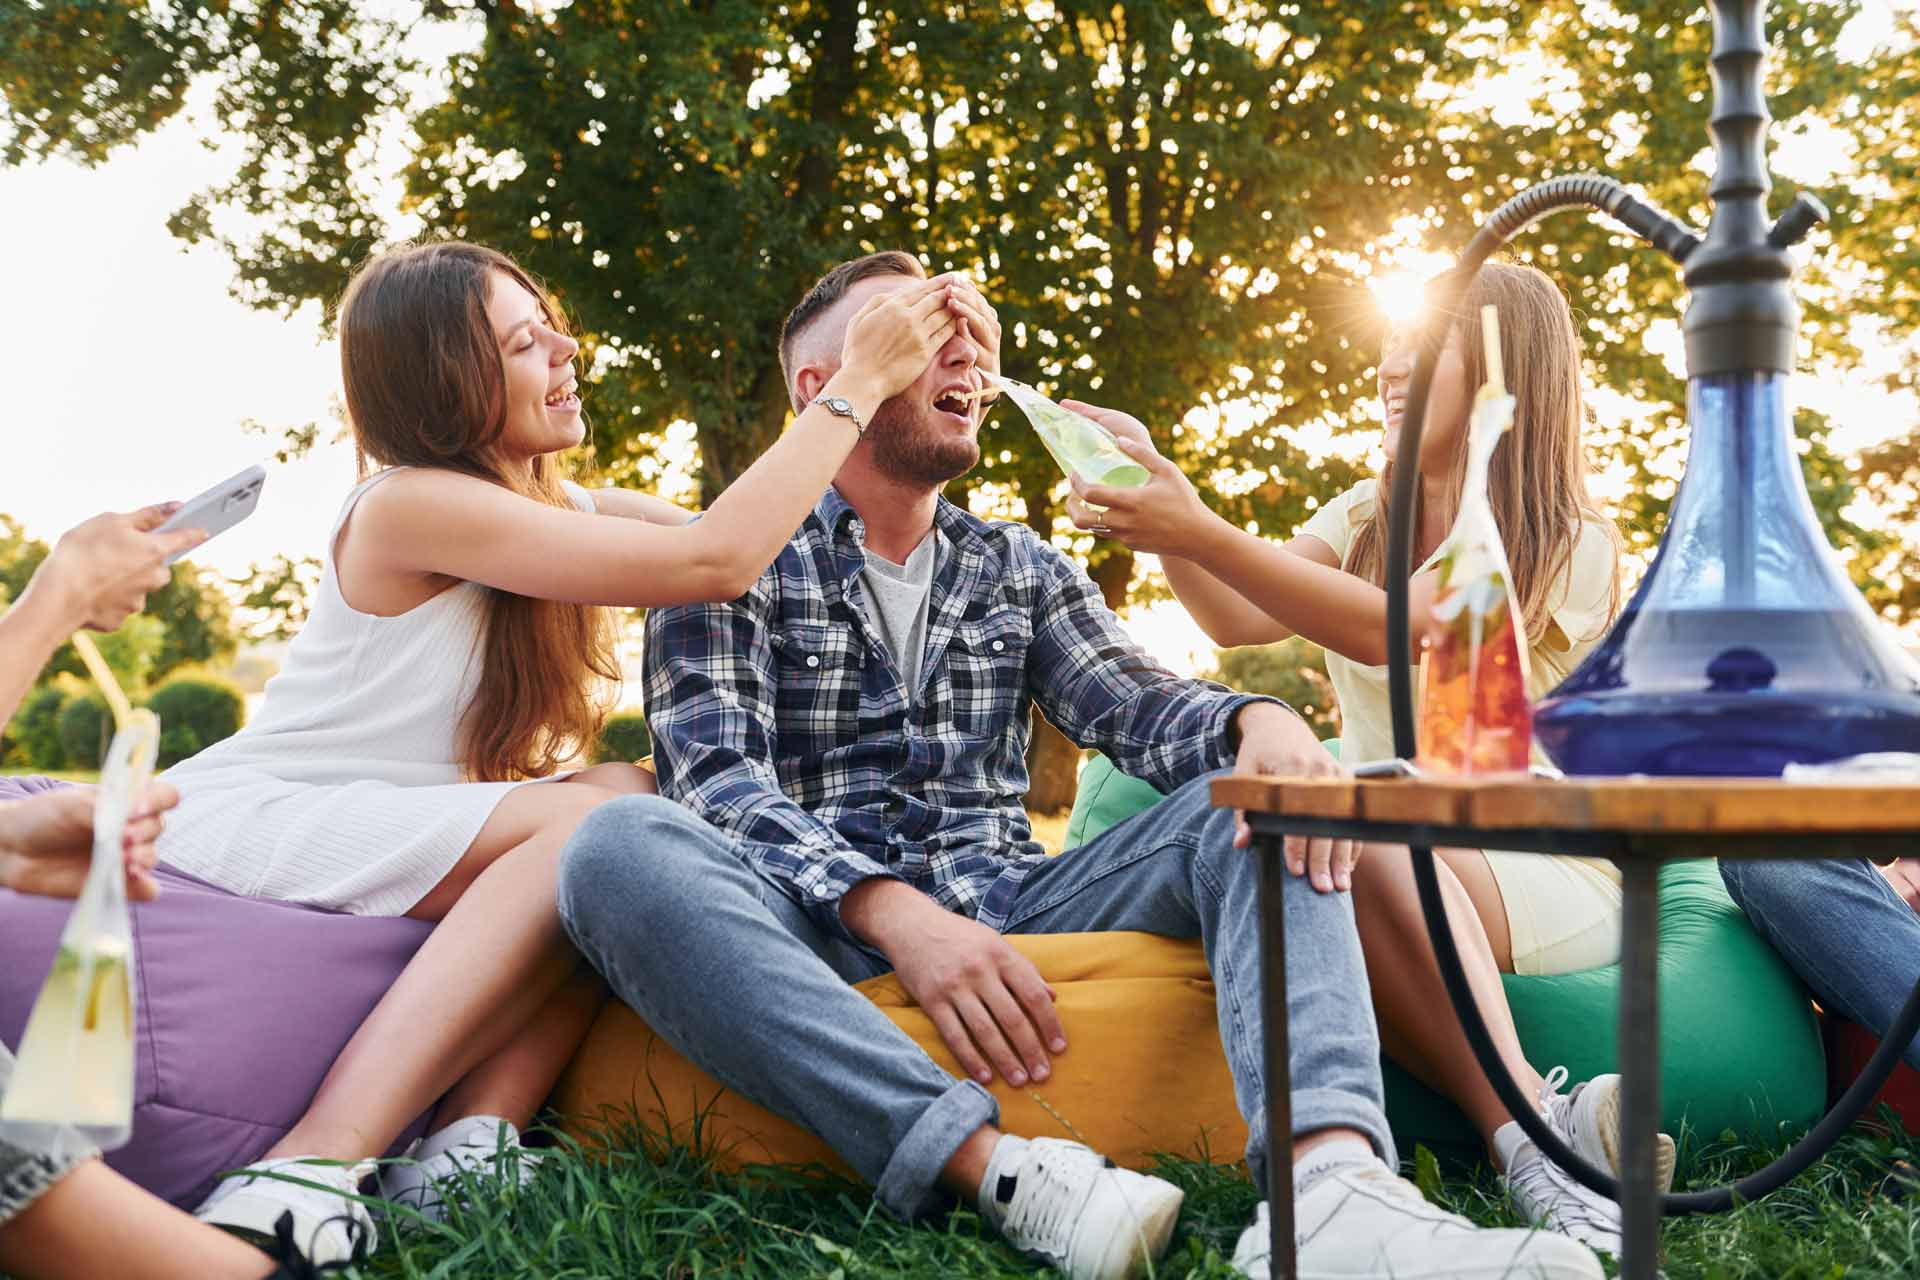 5 Fun Drinking Games You Can Play At Your Next House Party